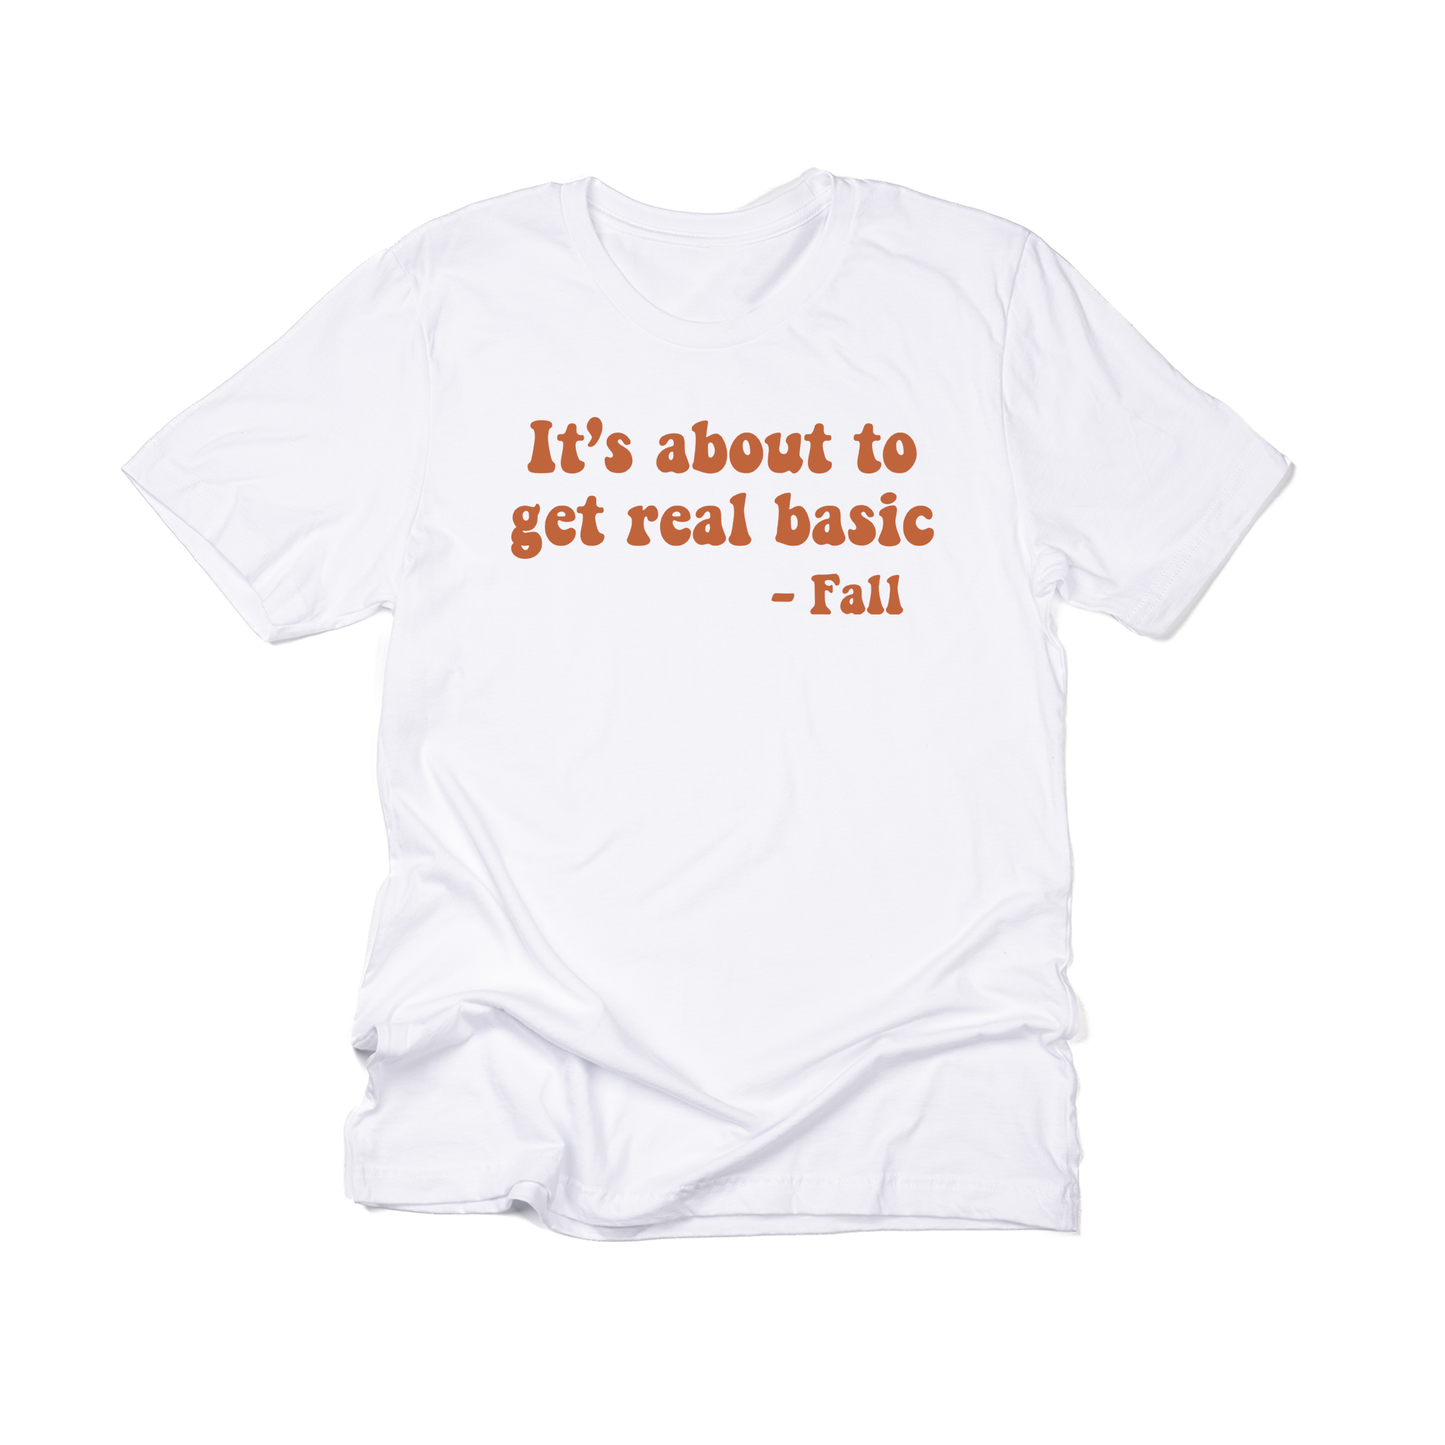 It's about to get real basic (Rust) - Tee (White)